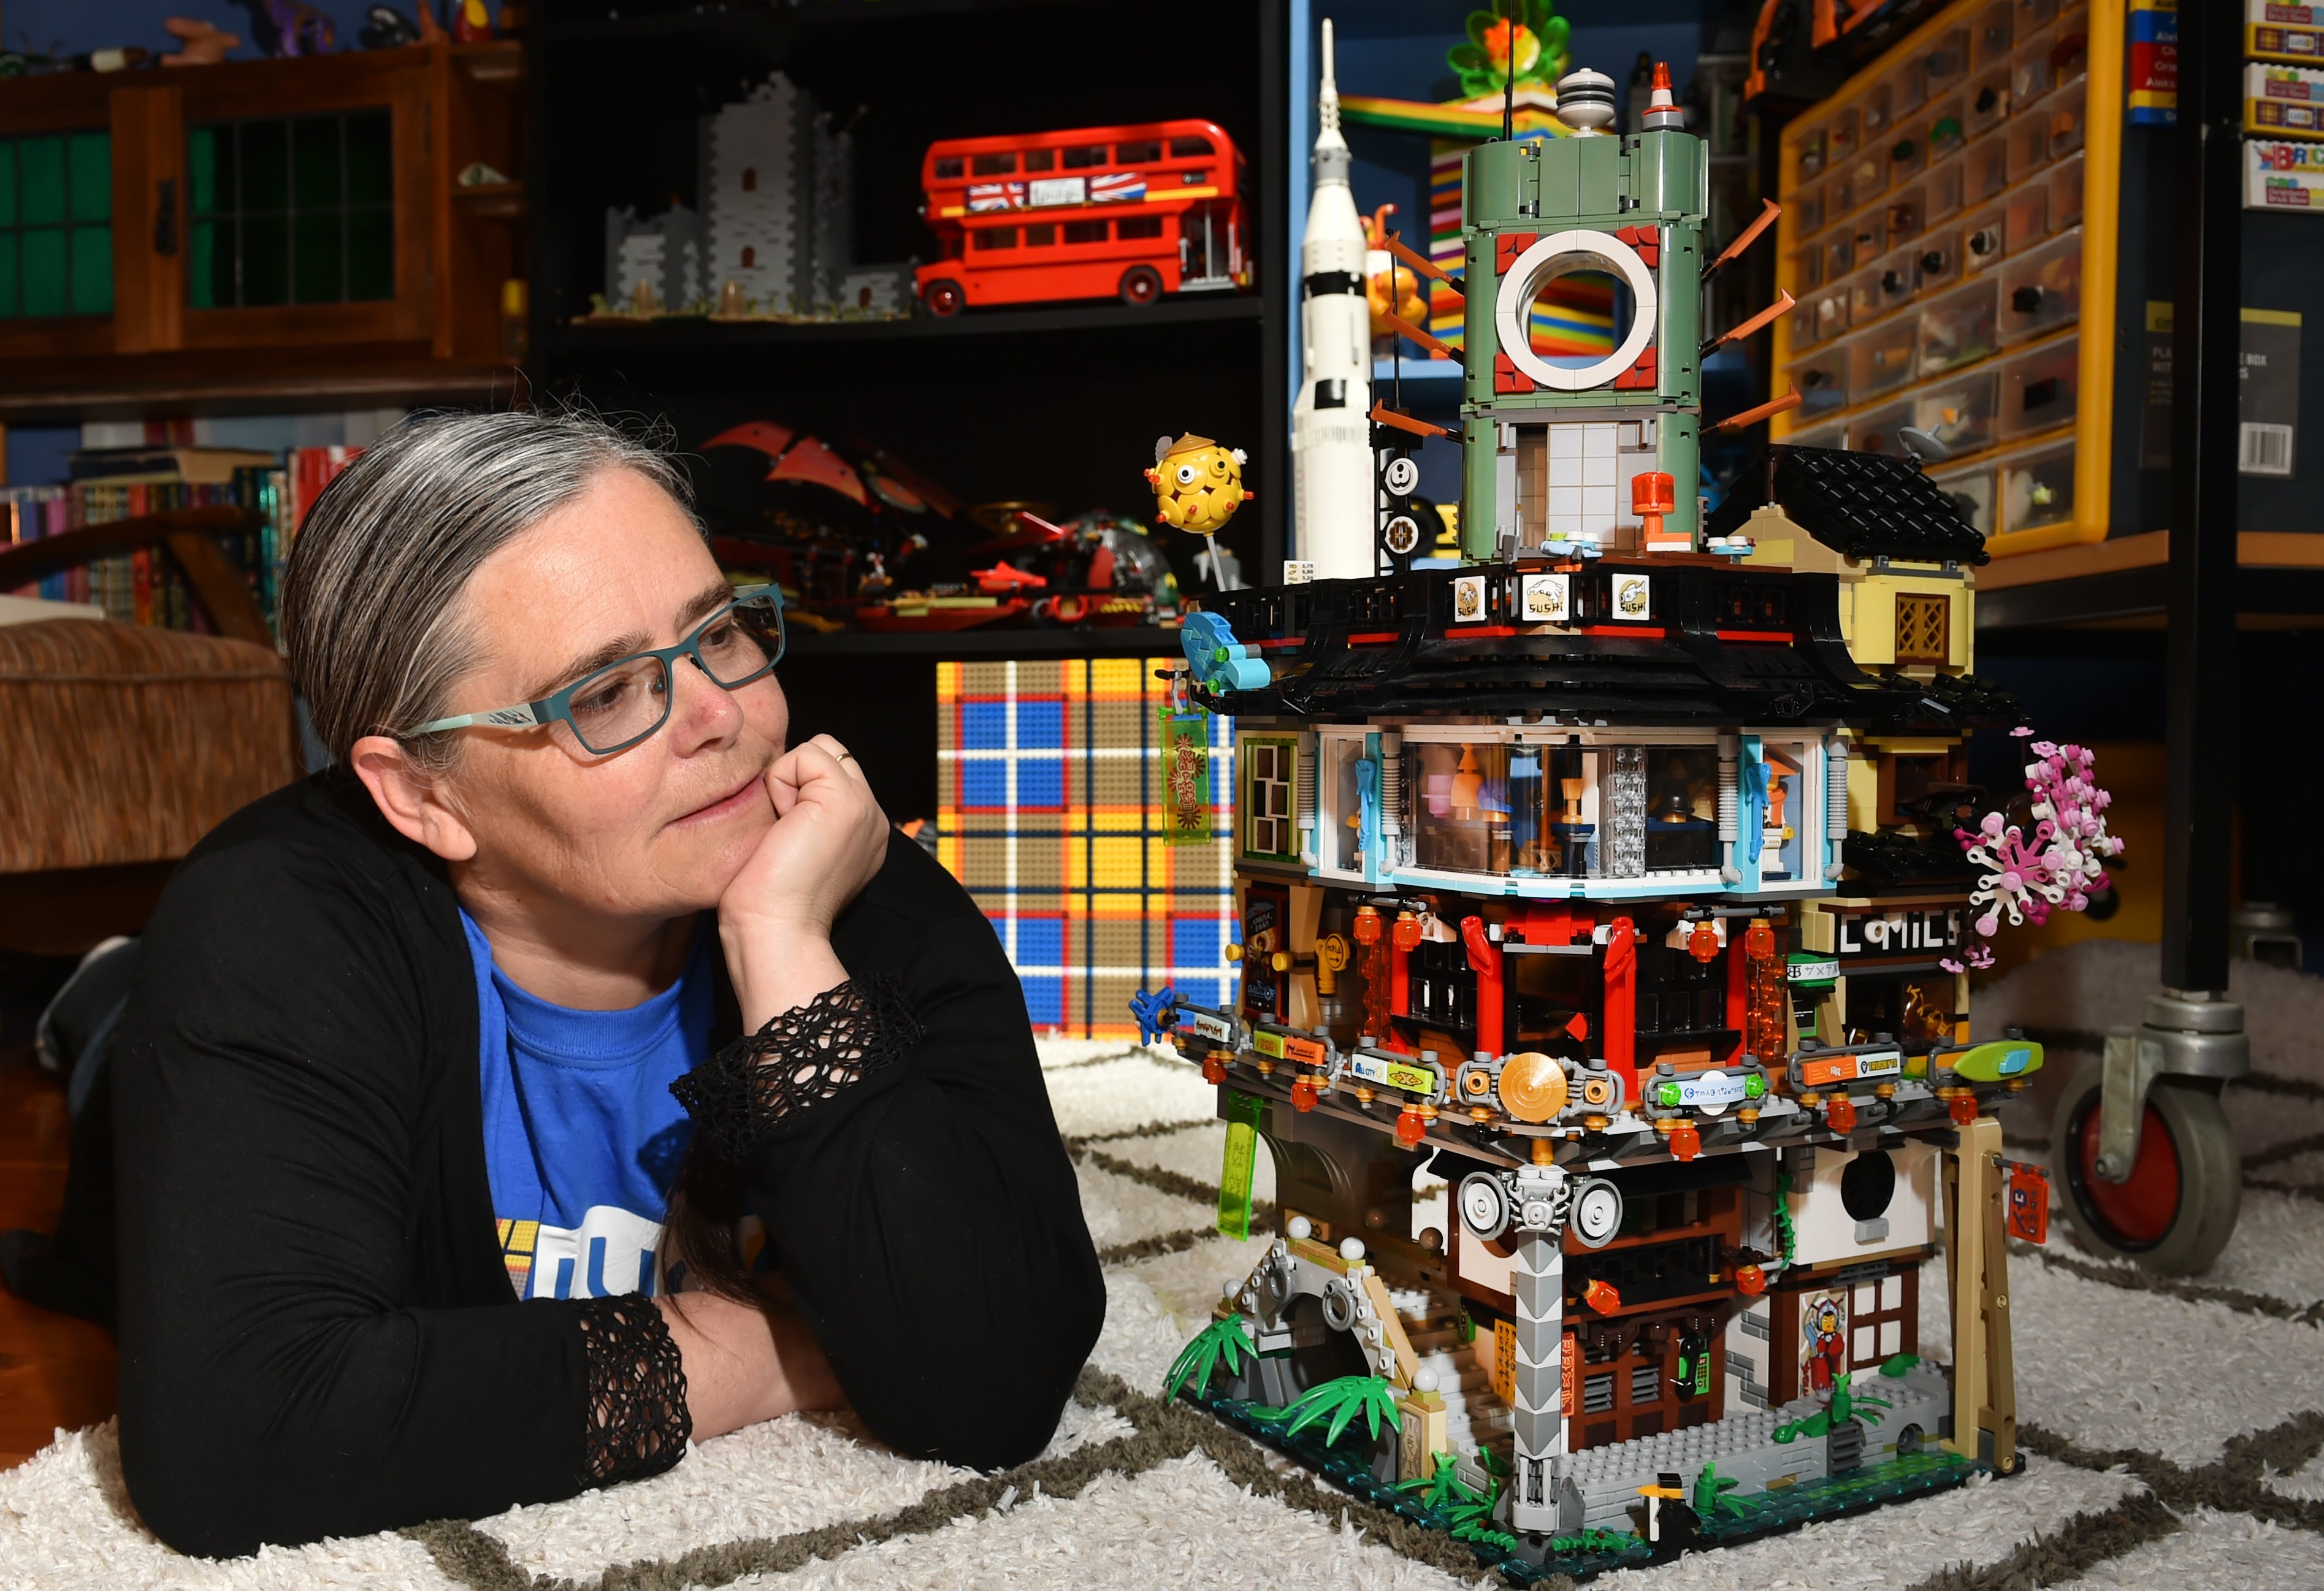 Q&A: Confessions of Lego enthusiast | Otago Daily Times Online News